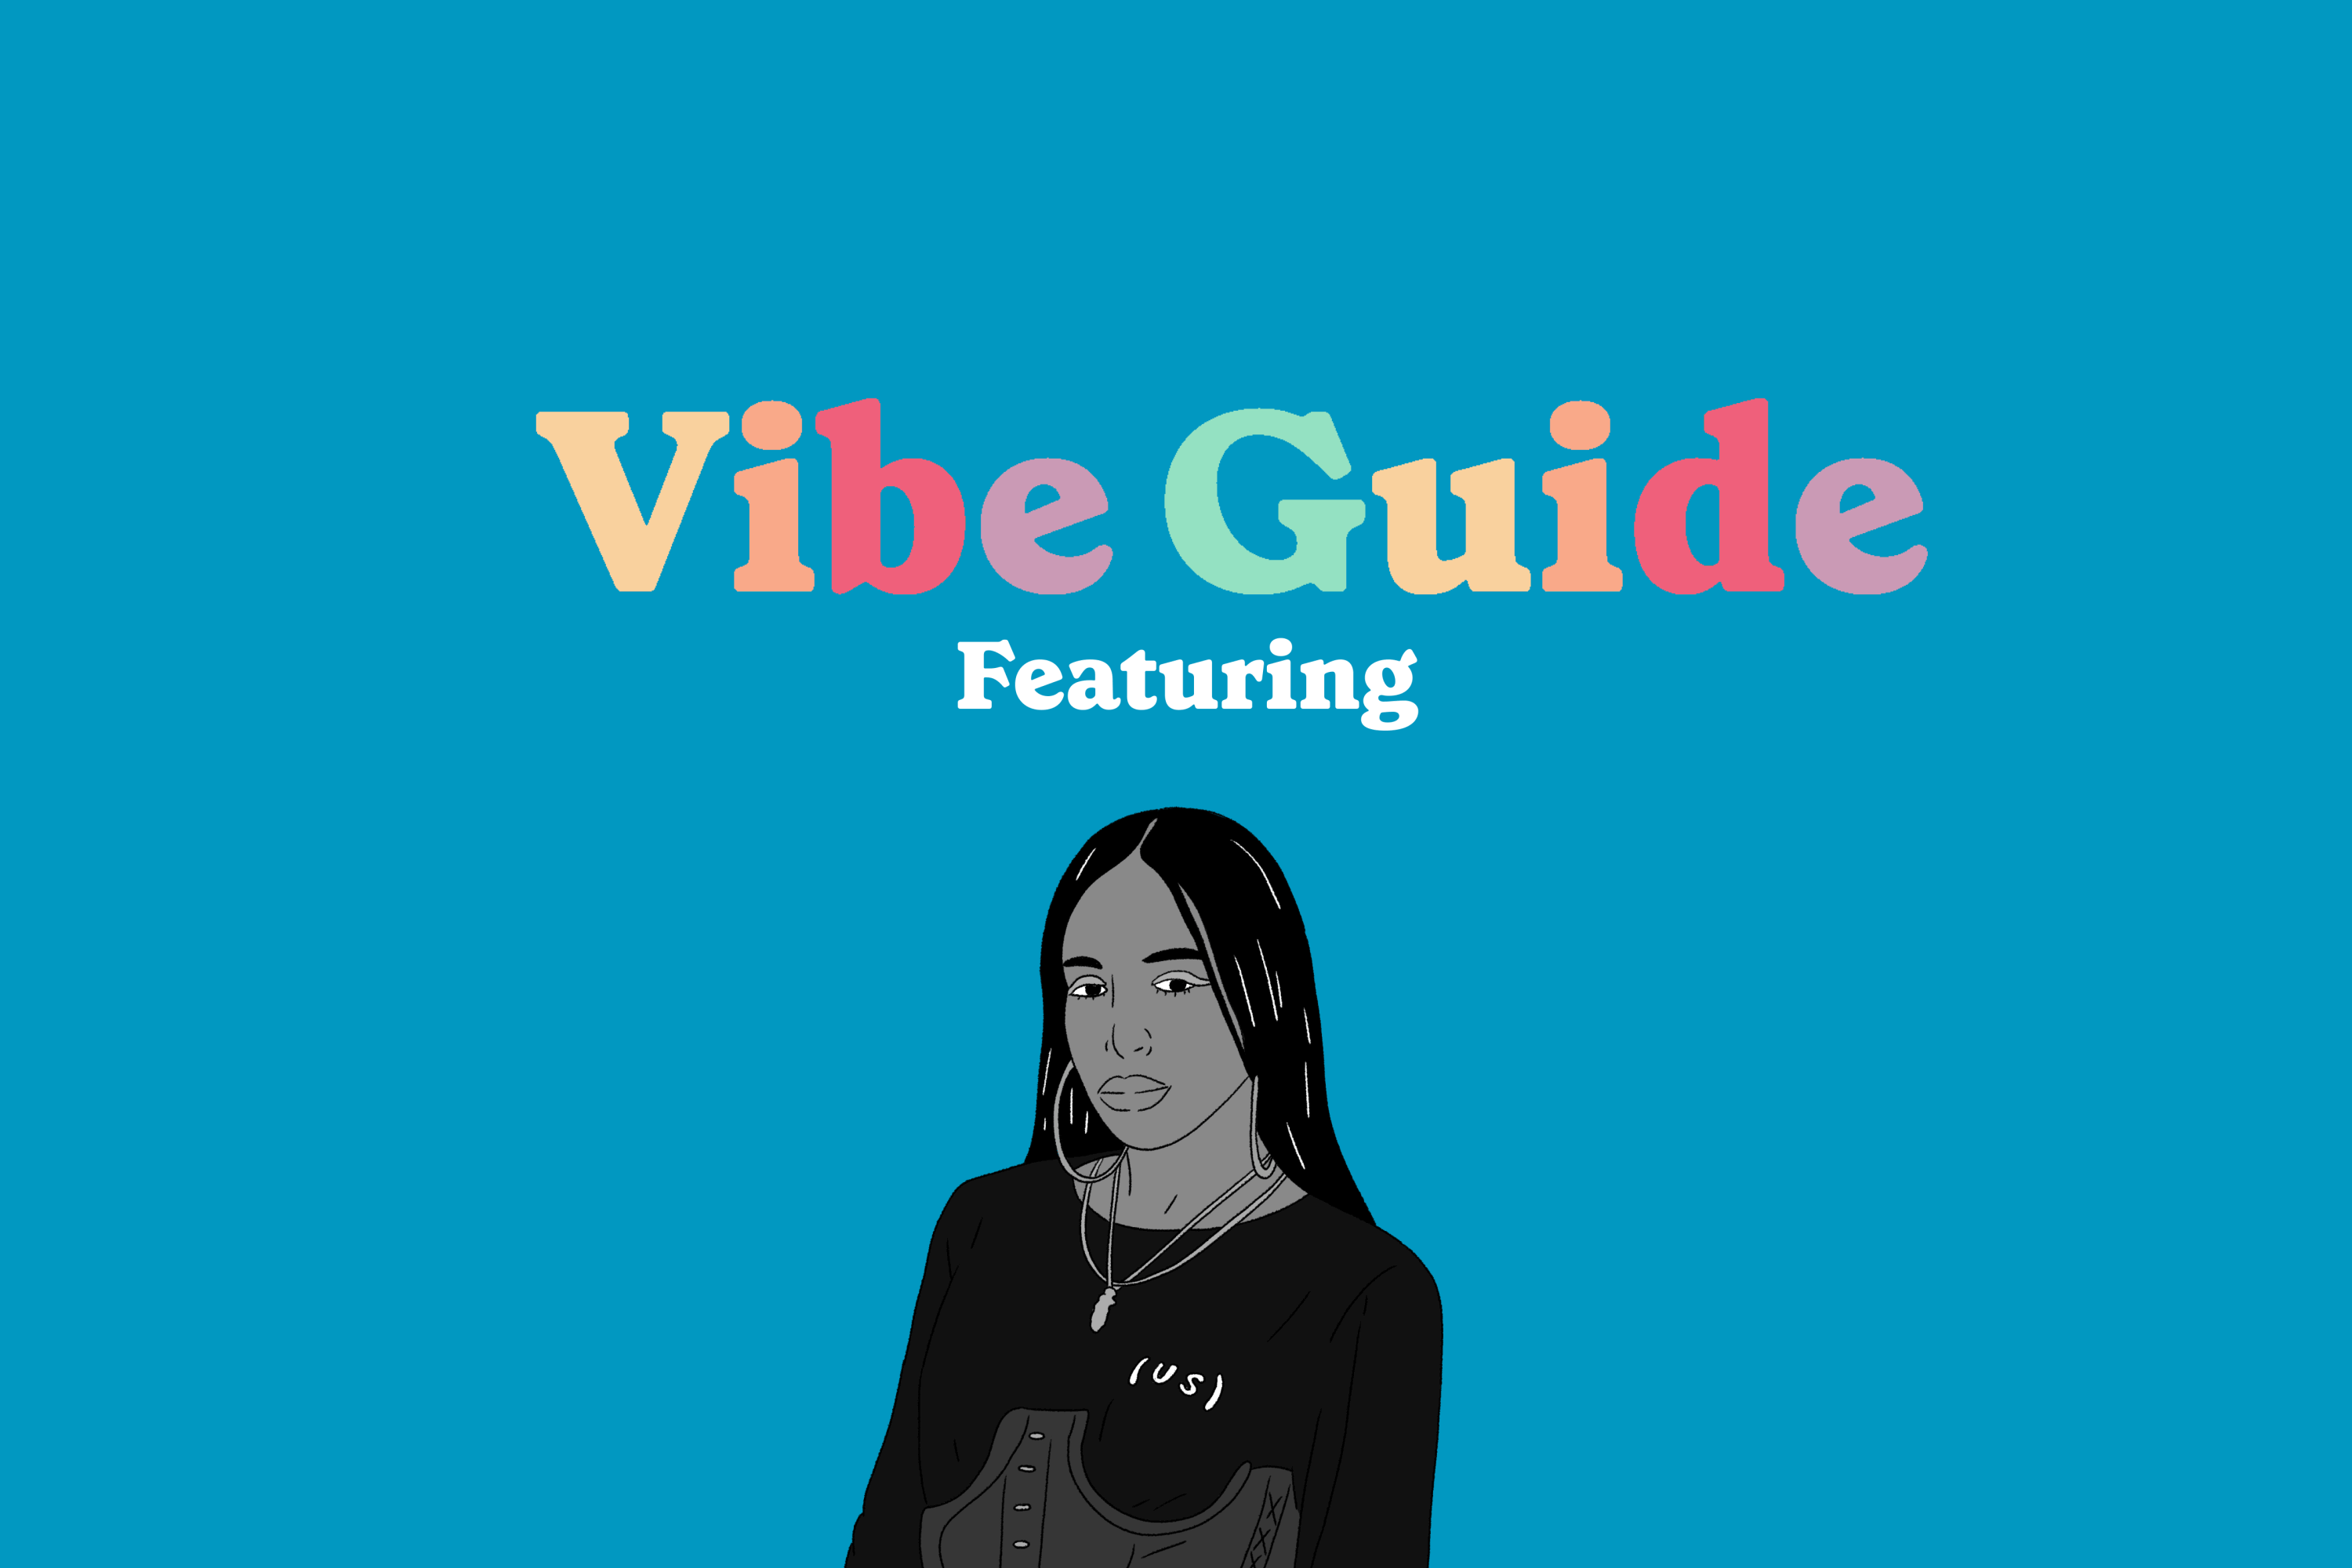 An illustration of a woman that says "Vibe Guide Featuring Natalia Mantini"